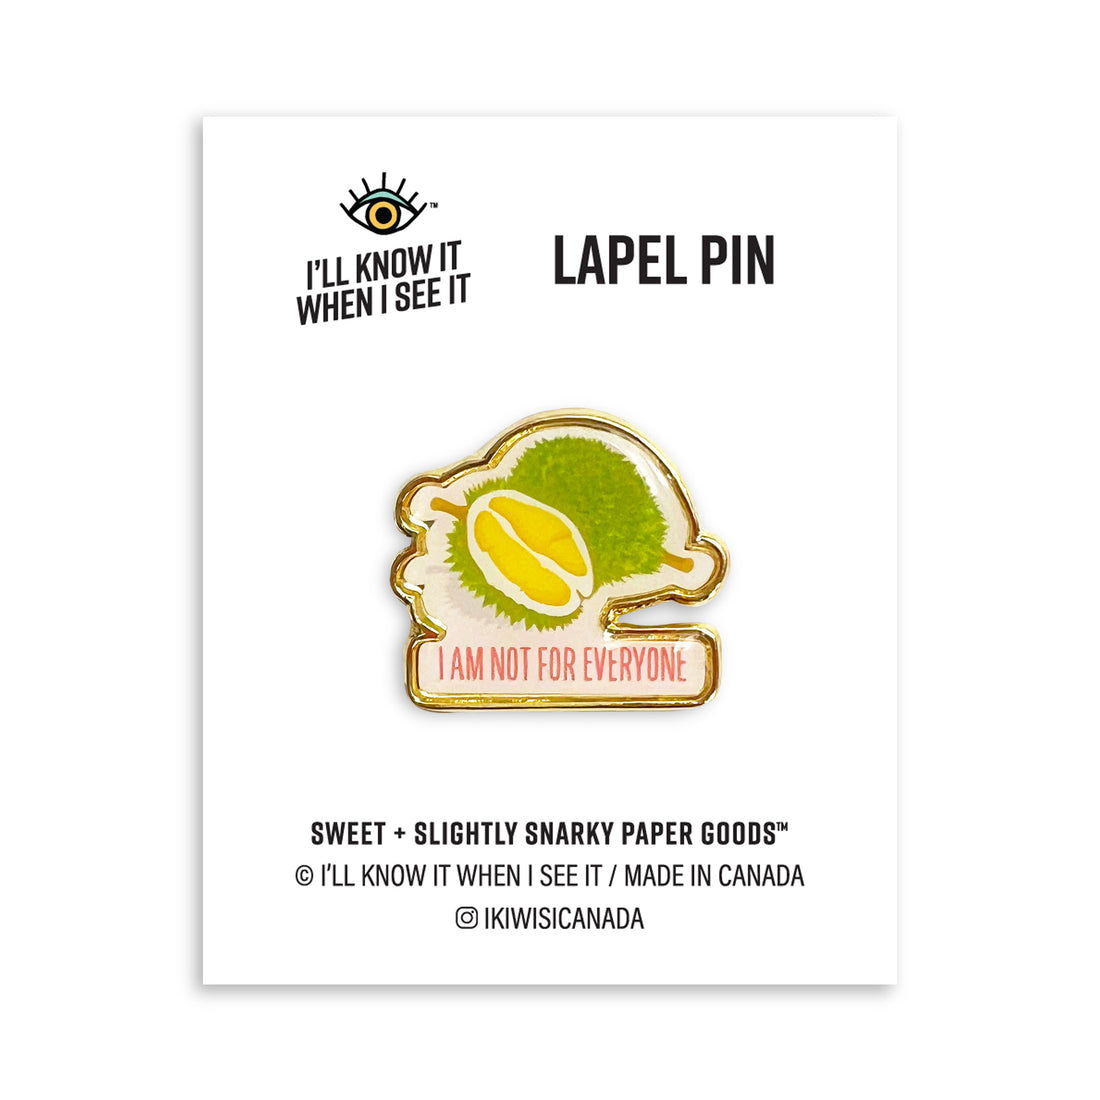 I am not for everyone durian lapel pin by I&